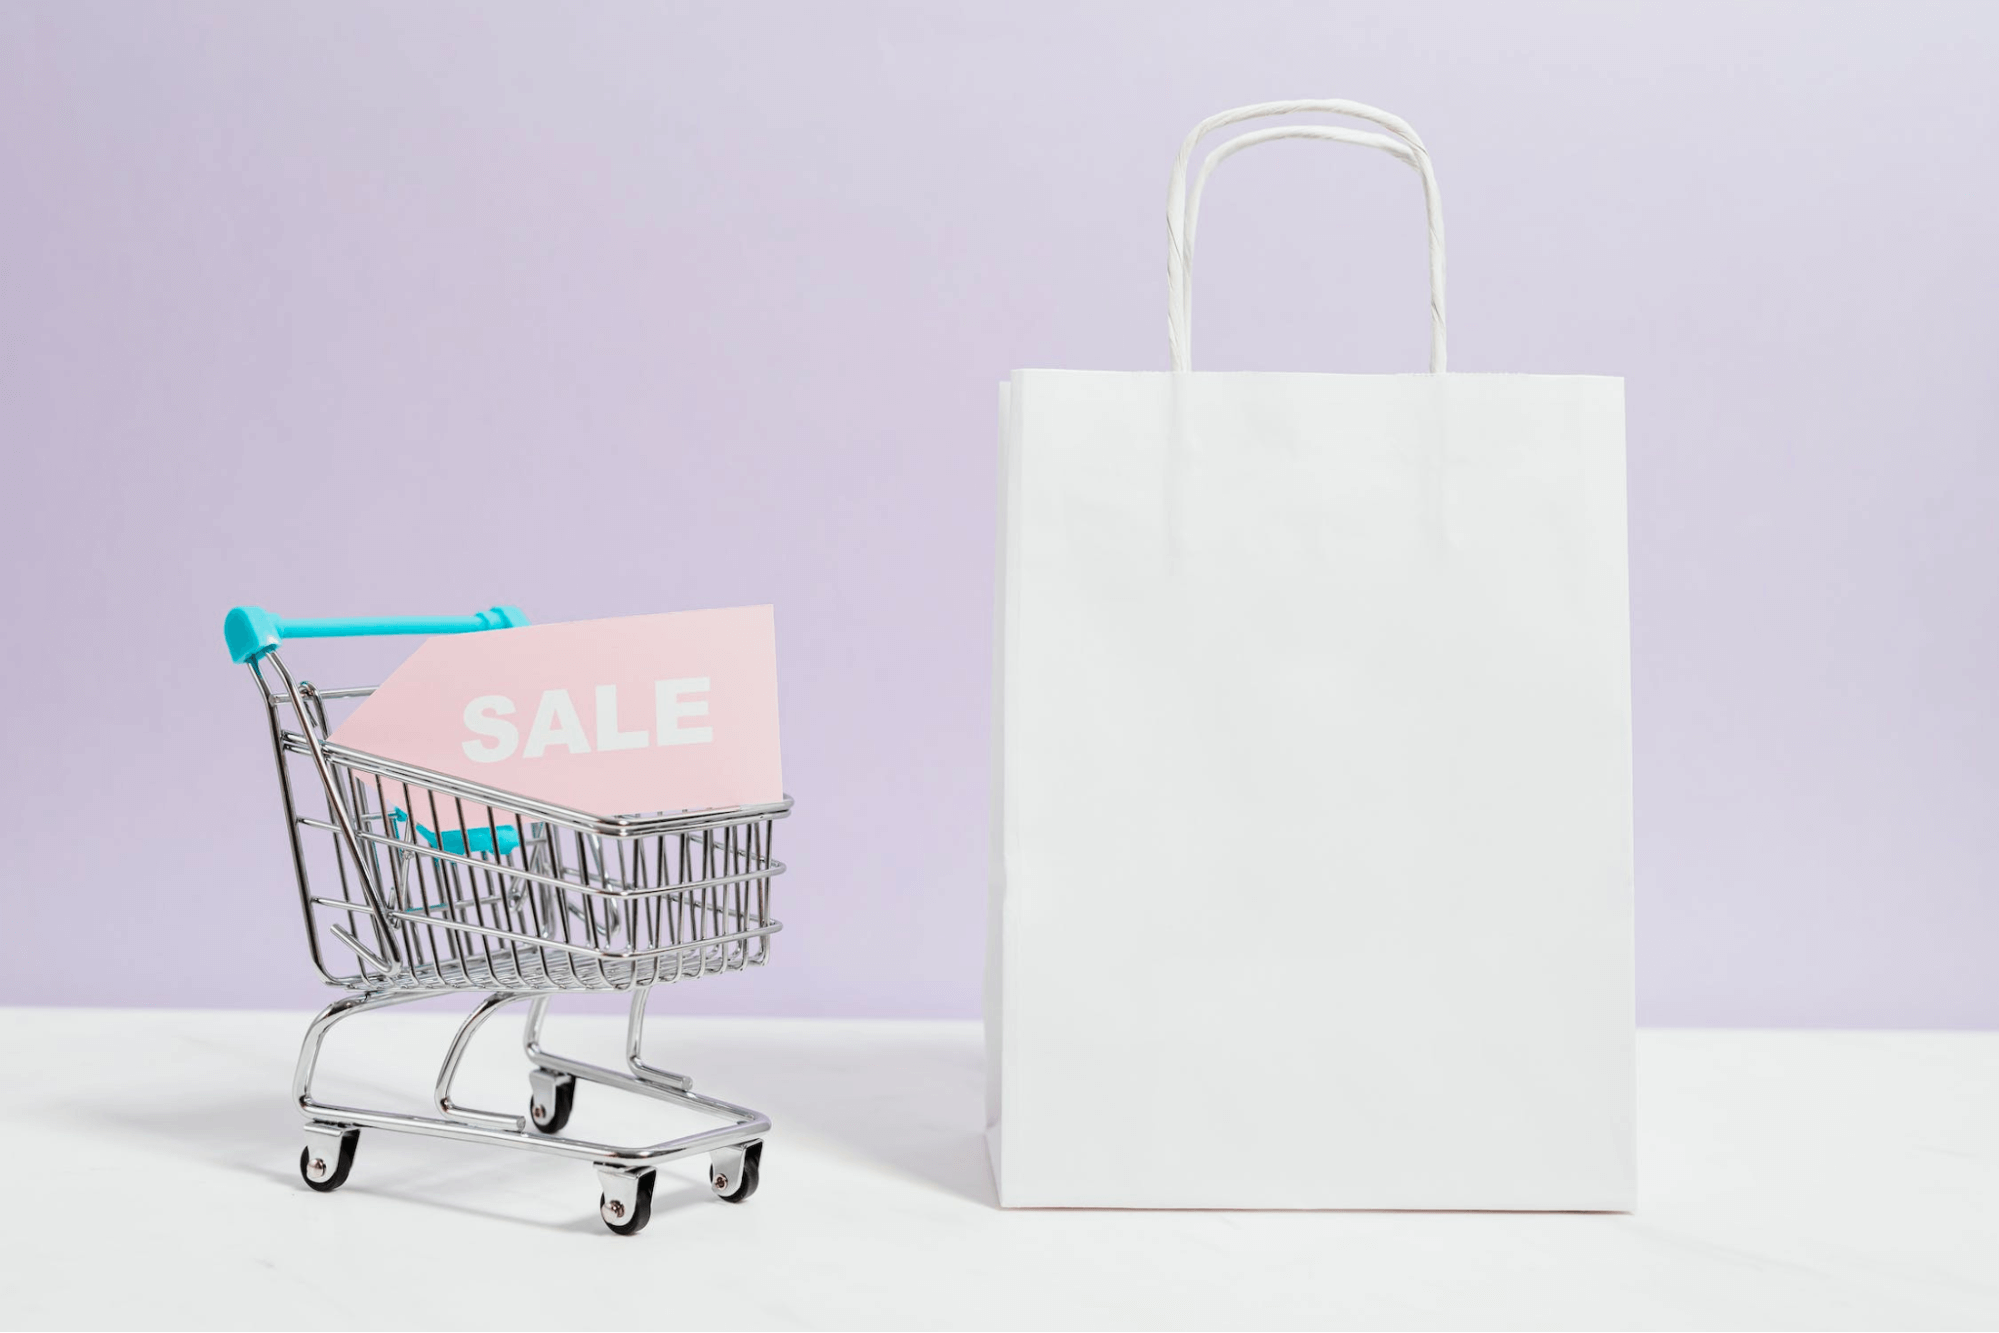 Find out which is the best shopping cart for you